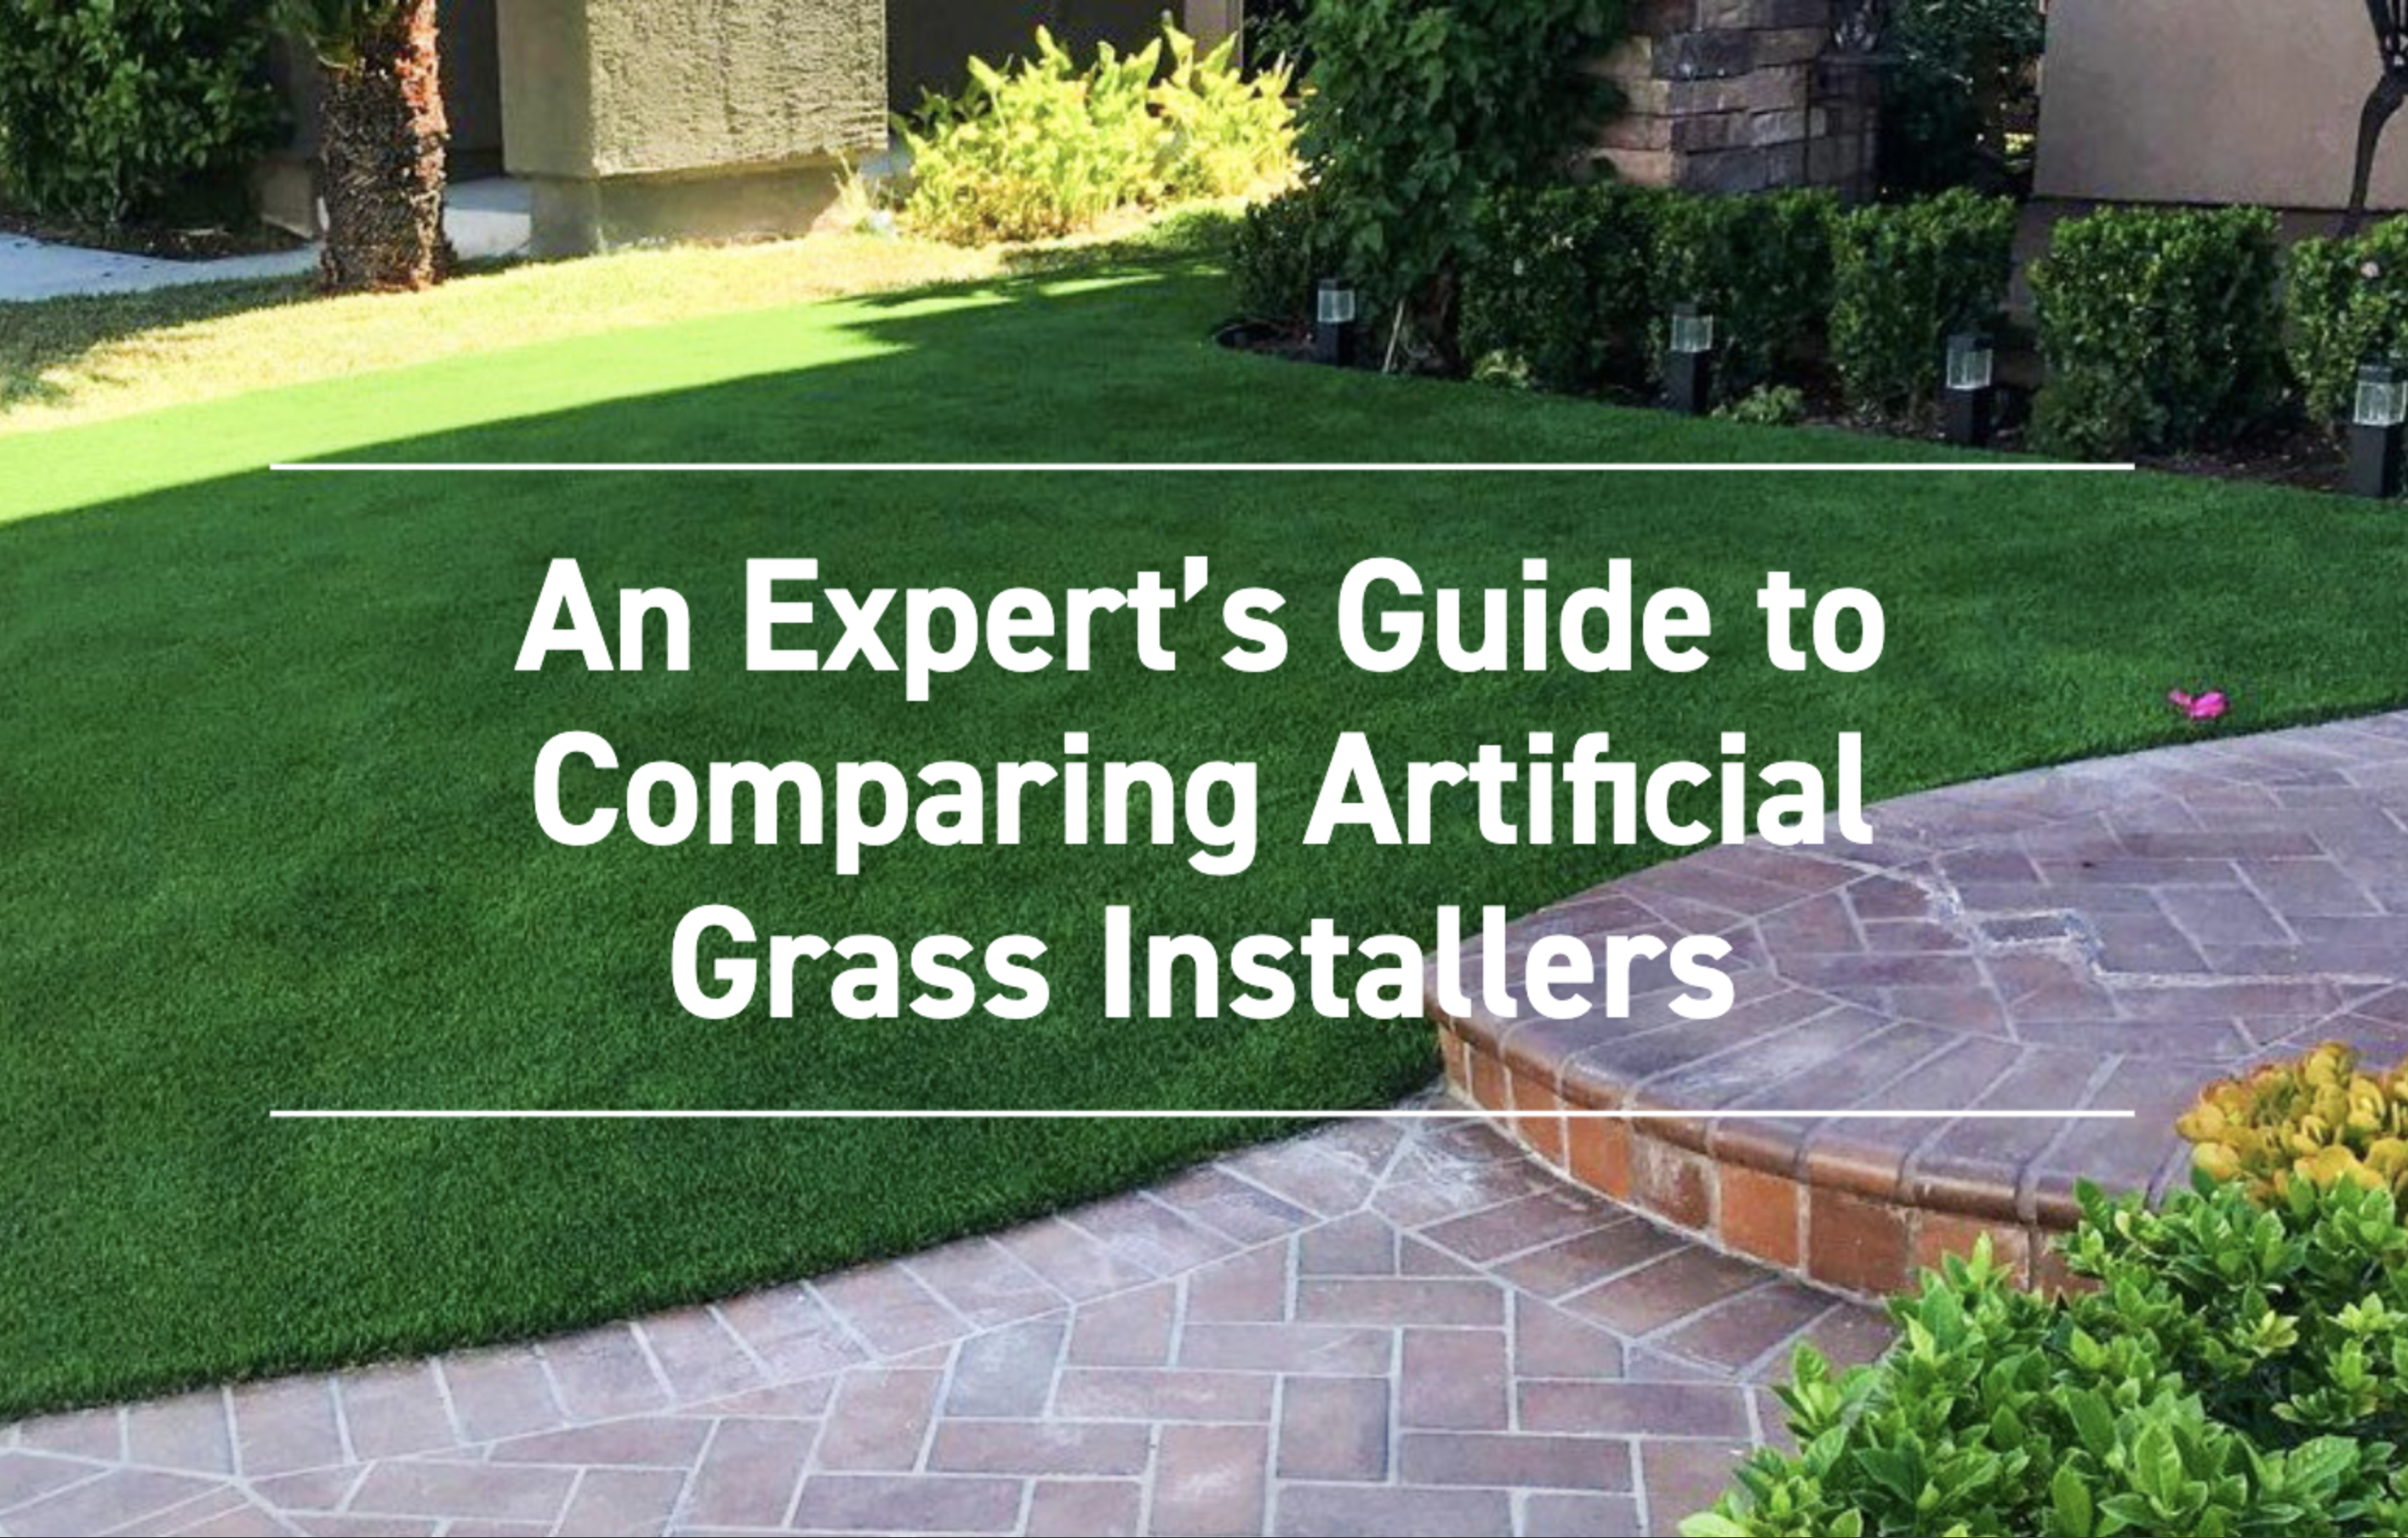 An Experts Guide to Comparing Artificial Grass Installers